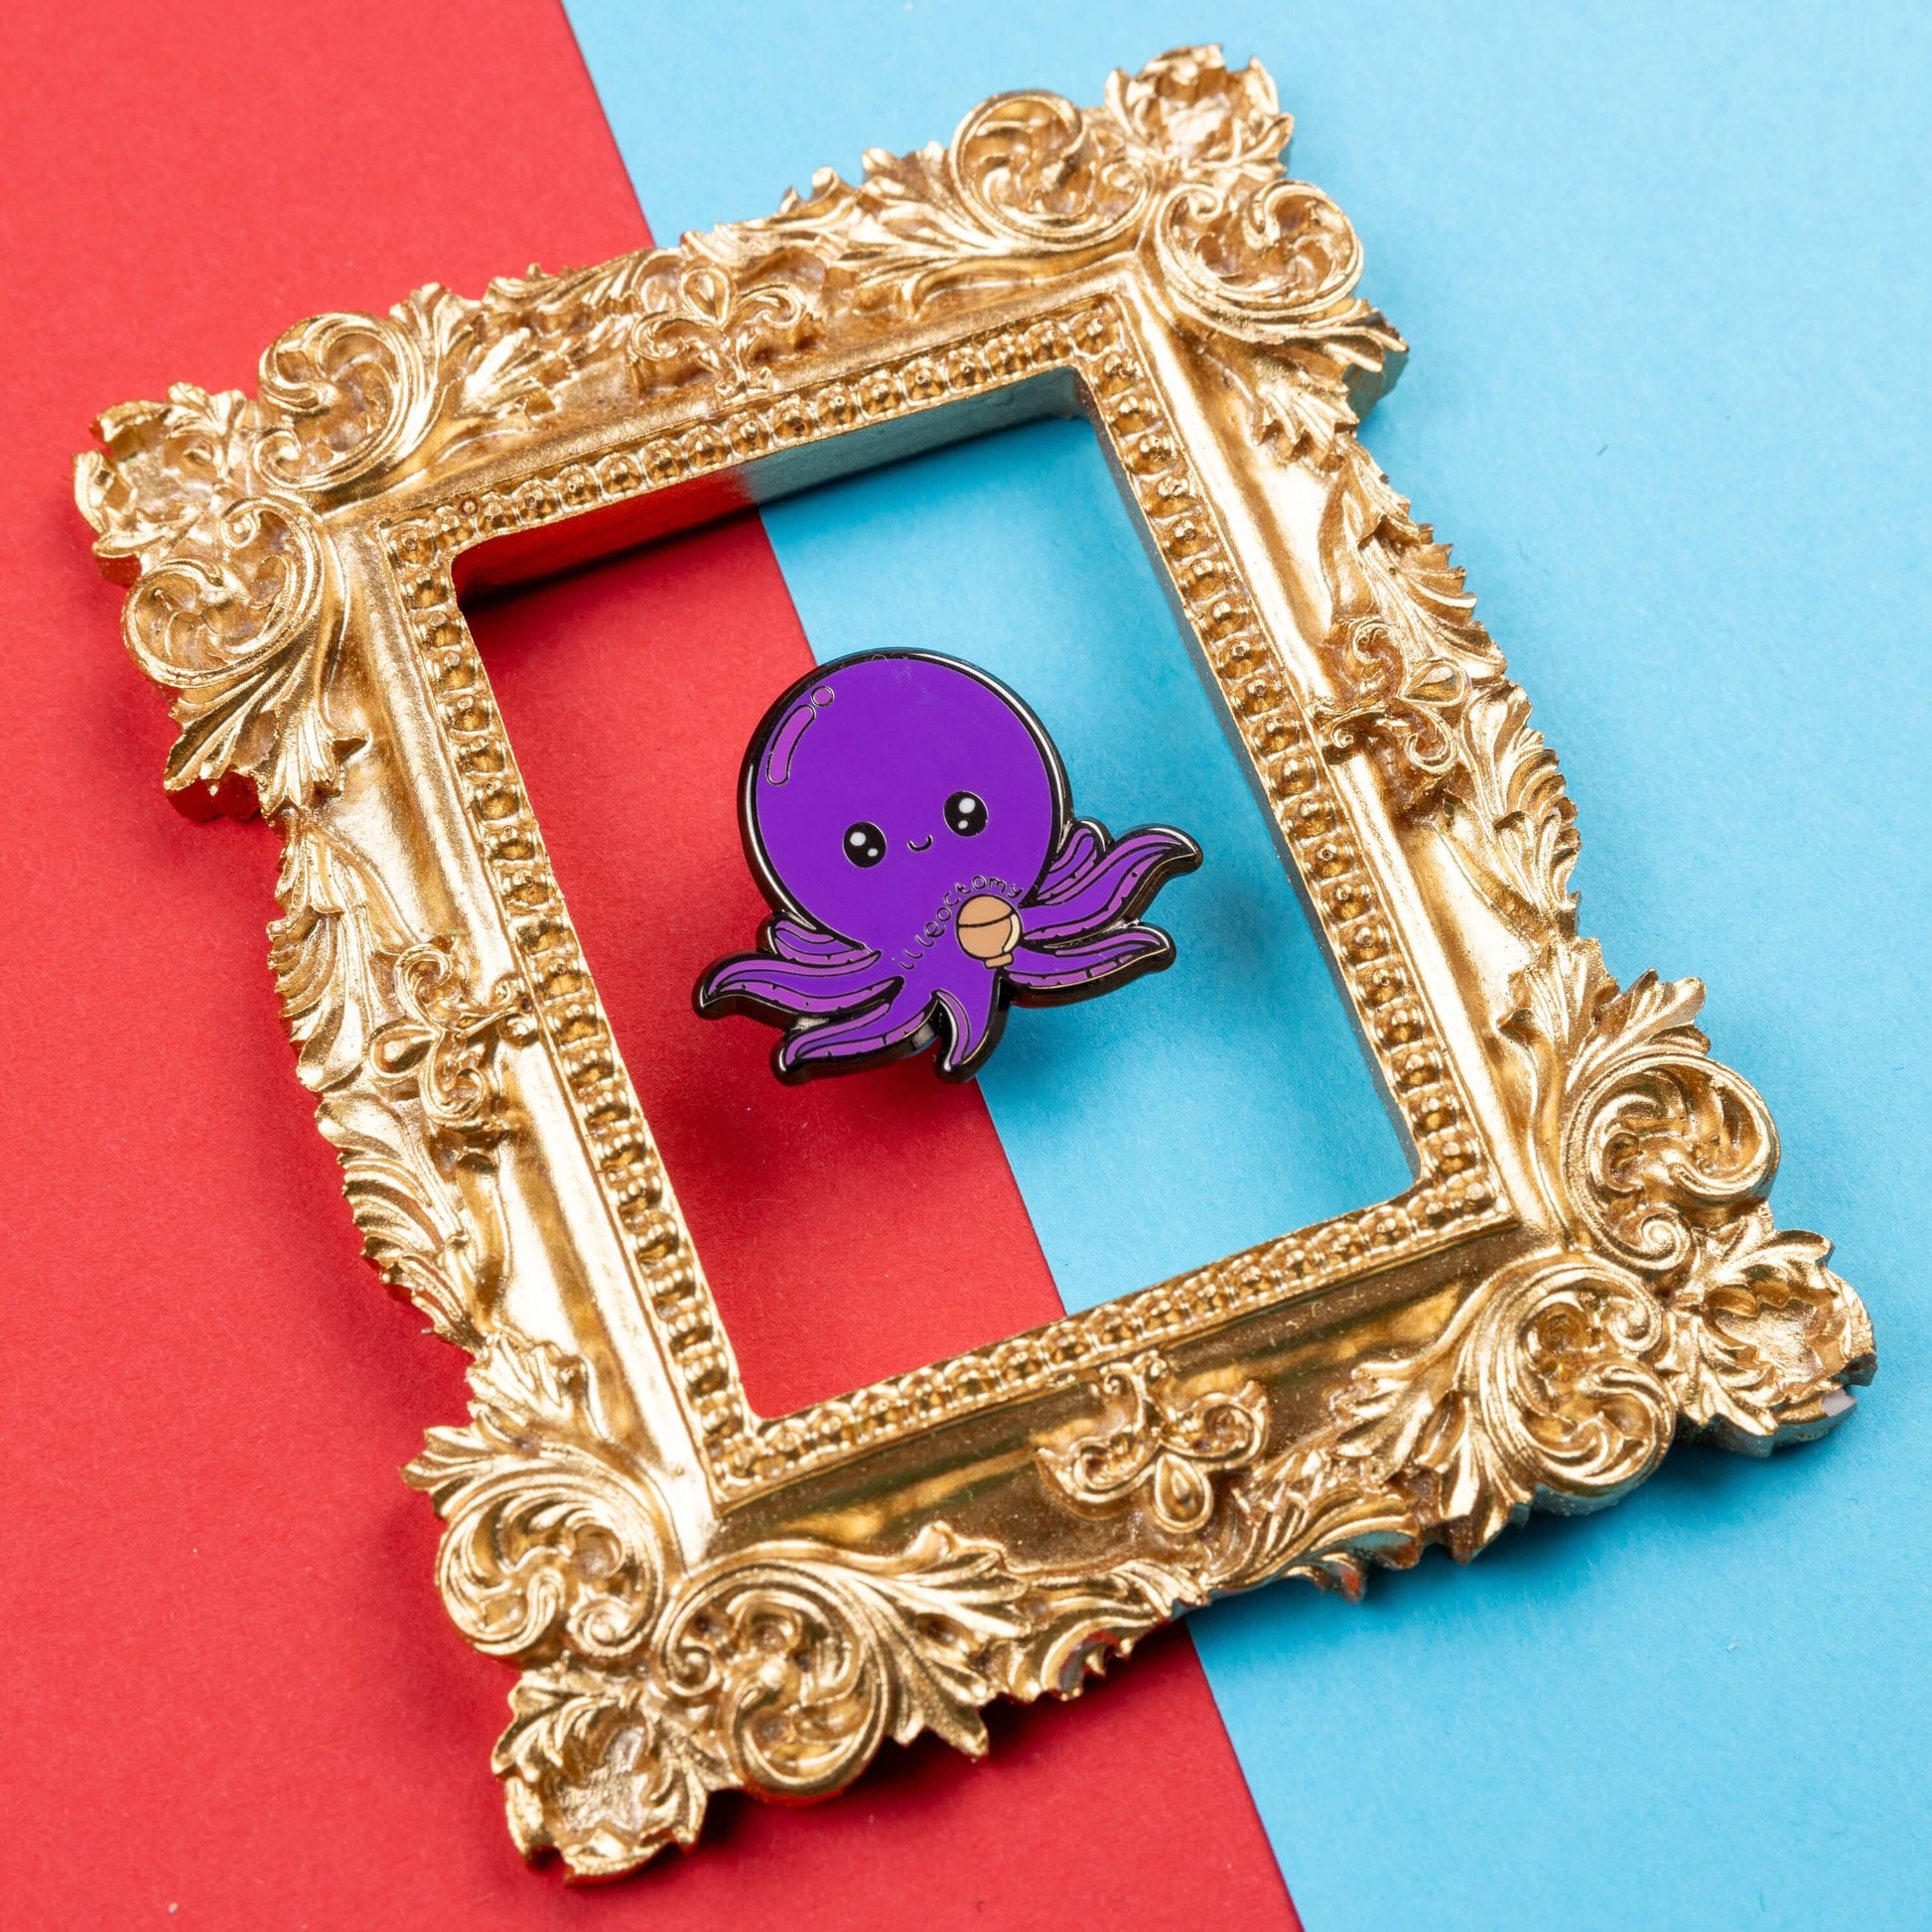 Ileoctomy Enamel Pin - Ileostomy on a blue and red card background inside a gold ornate frame. The enamel pin is a cute smiling purple octopus sticker with text saying ileoctomy on its belly with a stoma bag underneath. Enamel pin designed to raise awareness for Ileostomy.